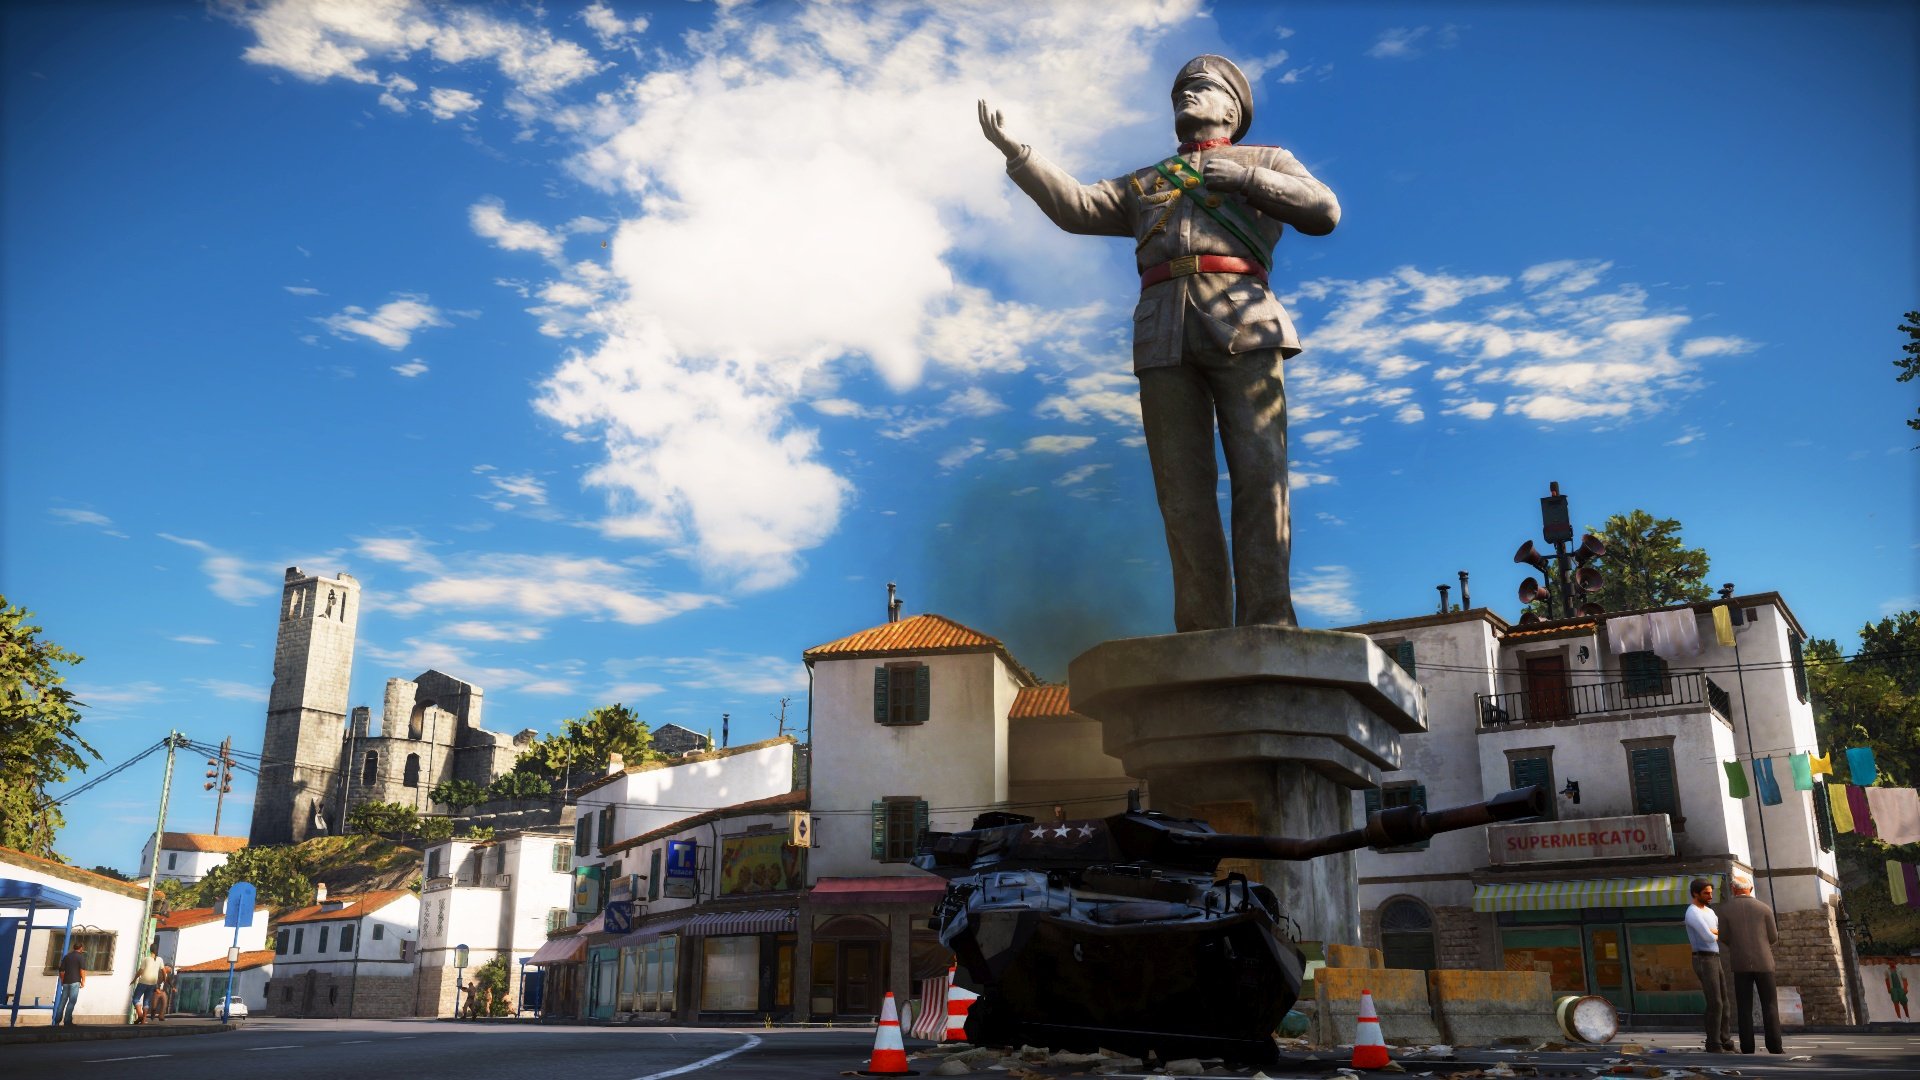 Video Game Just Cause 3 1920x1080